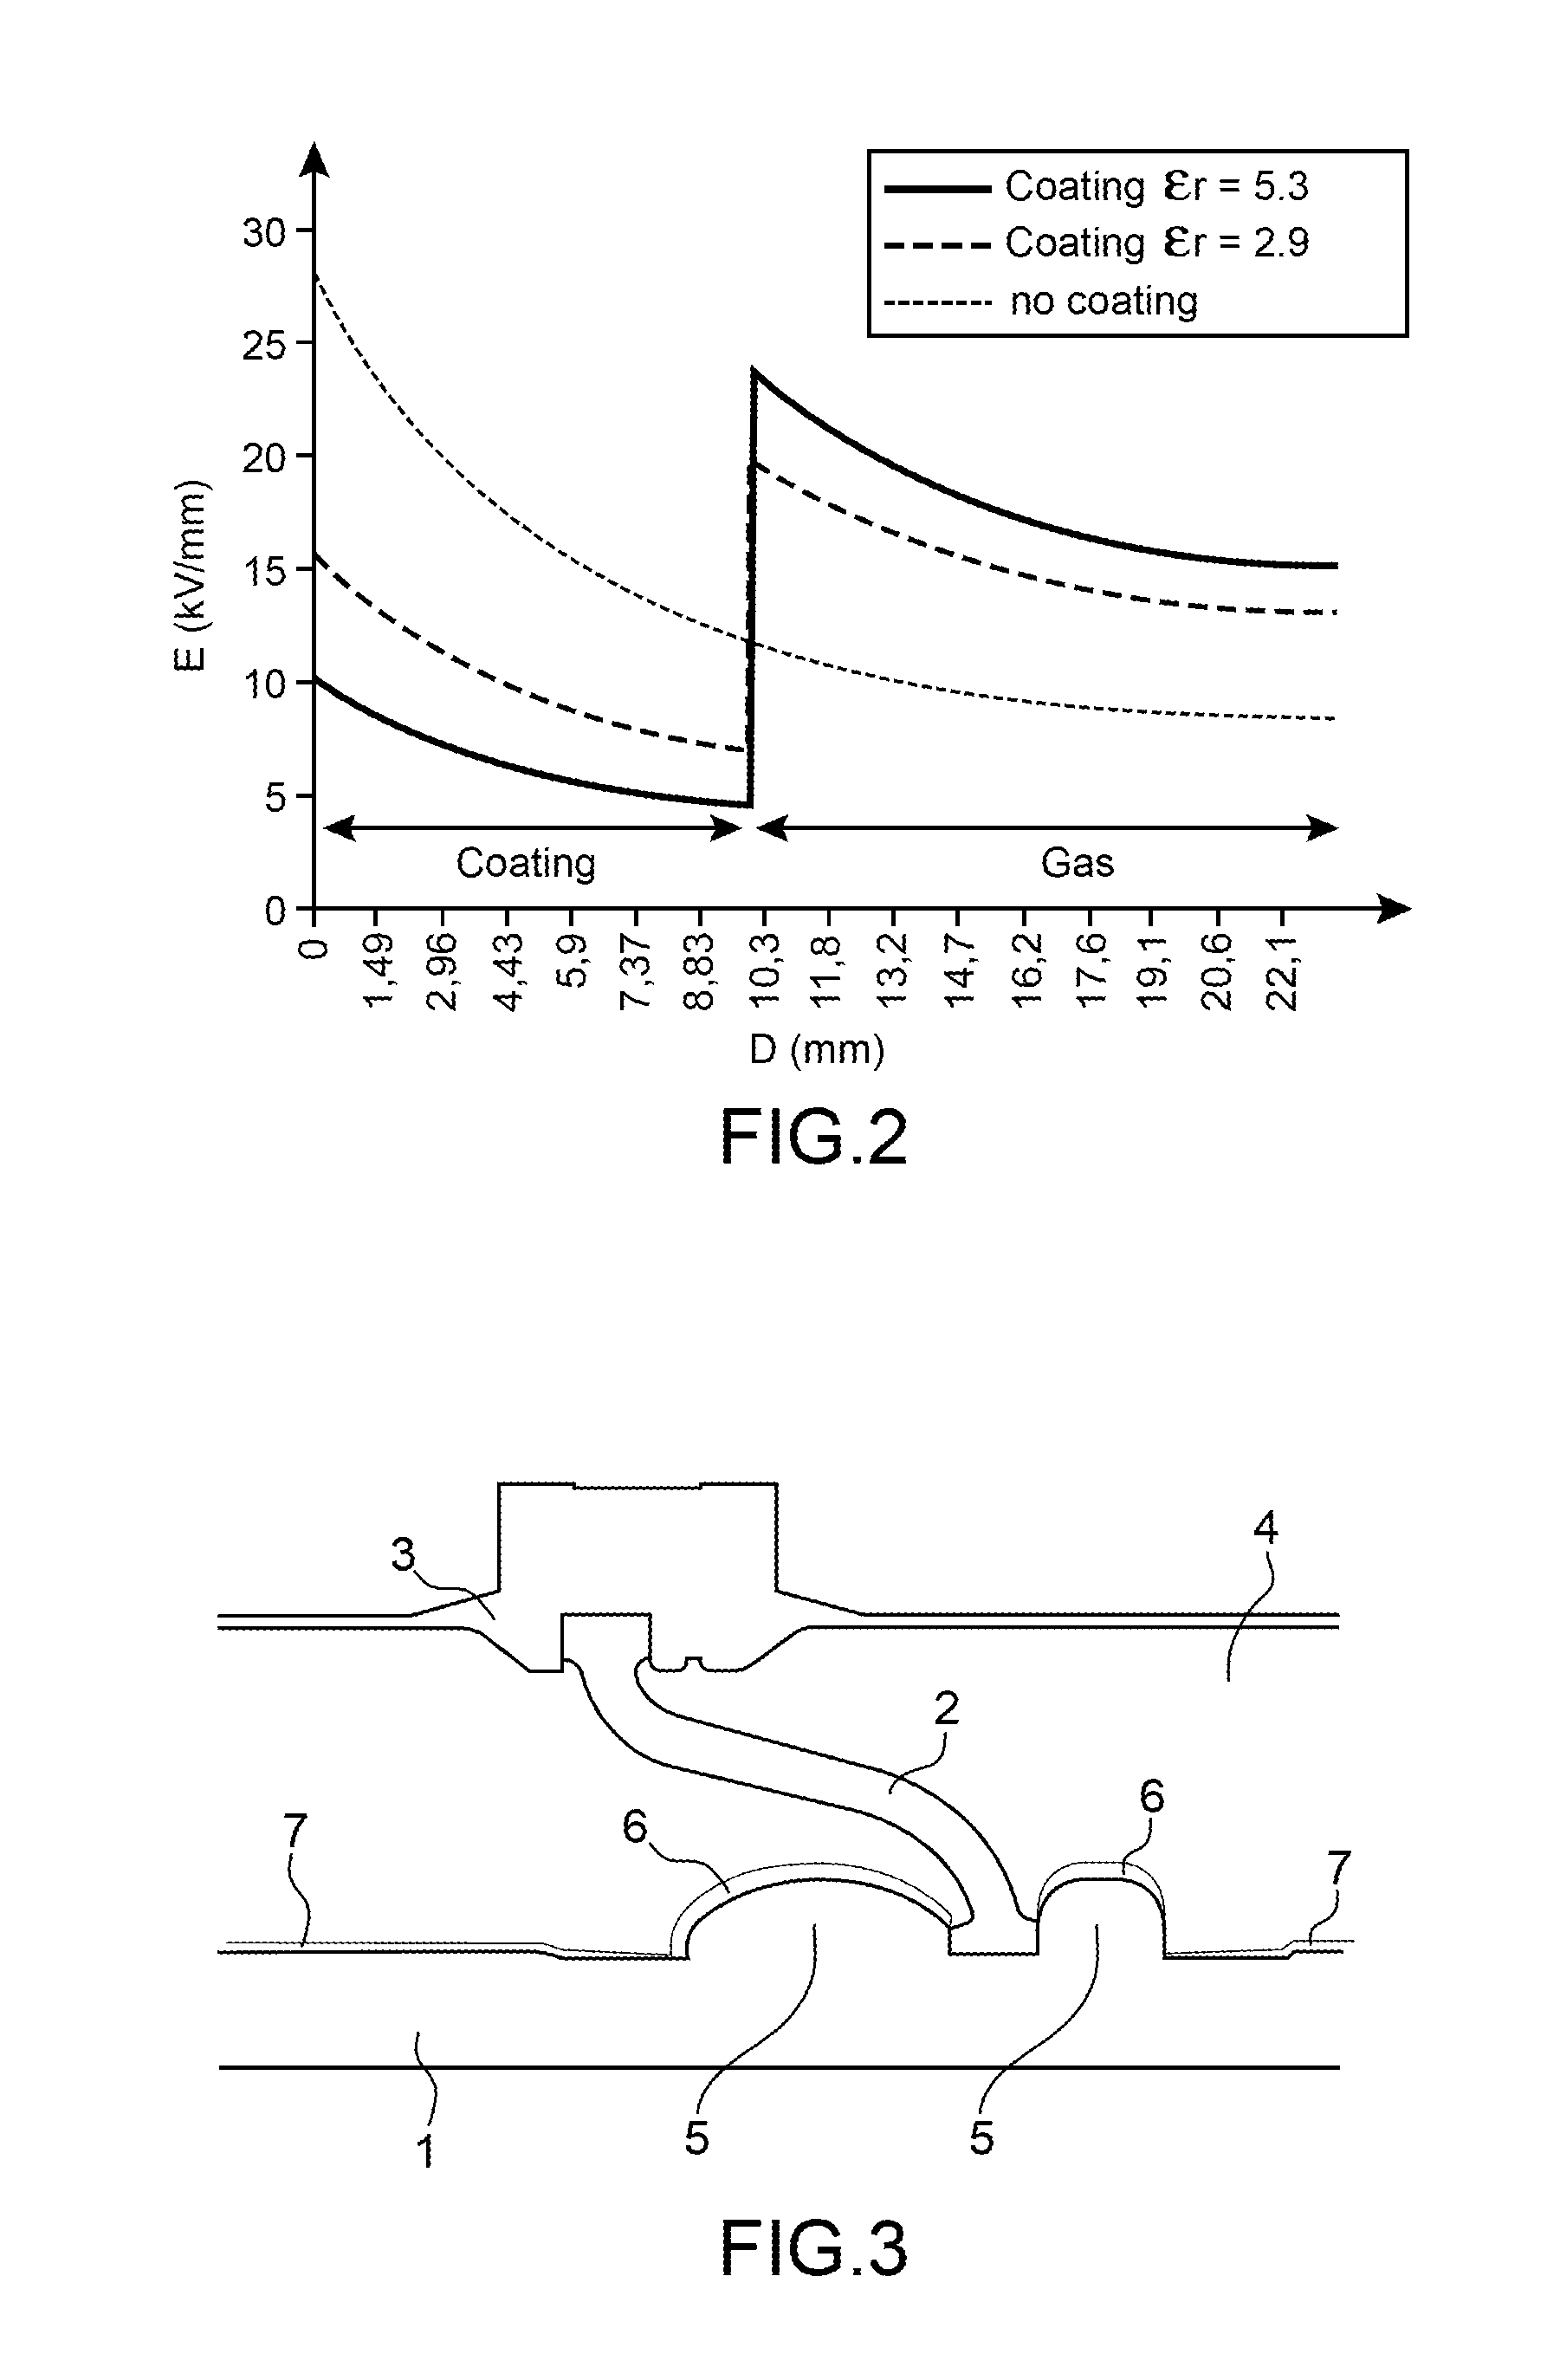 Medium-or high-voltage electrical appliance having a low environmental impact and hybrid insulation